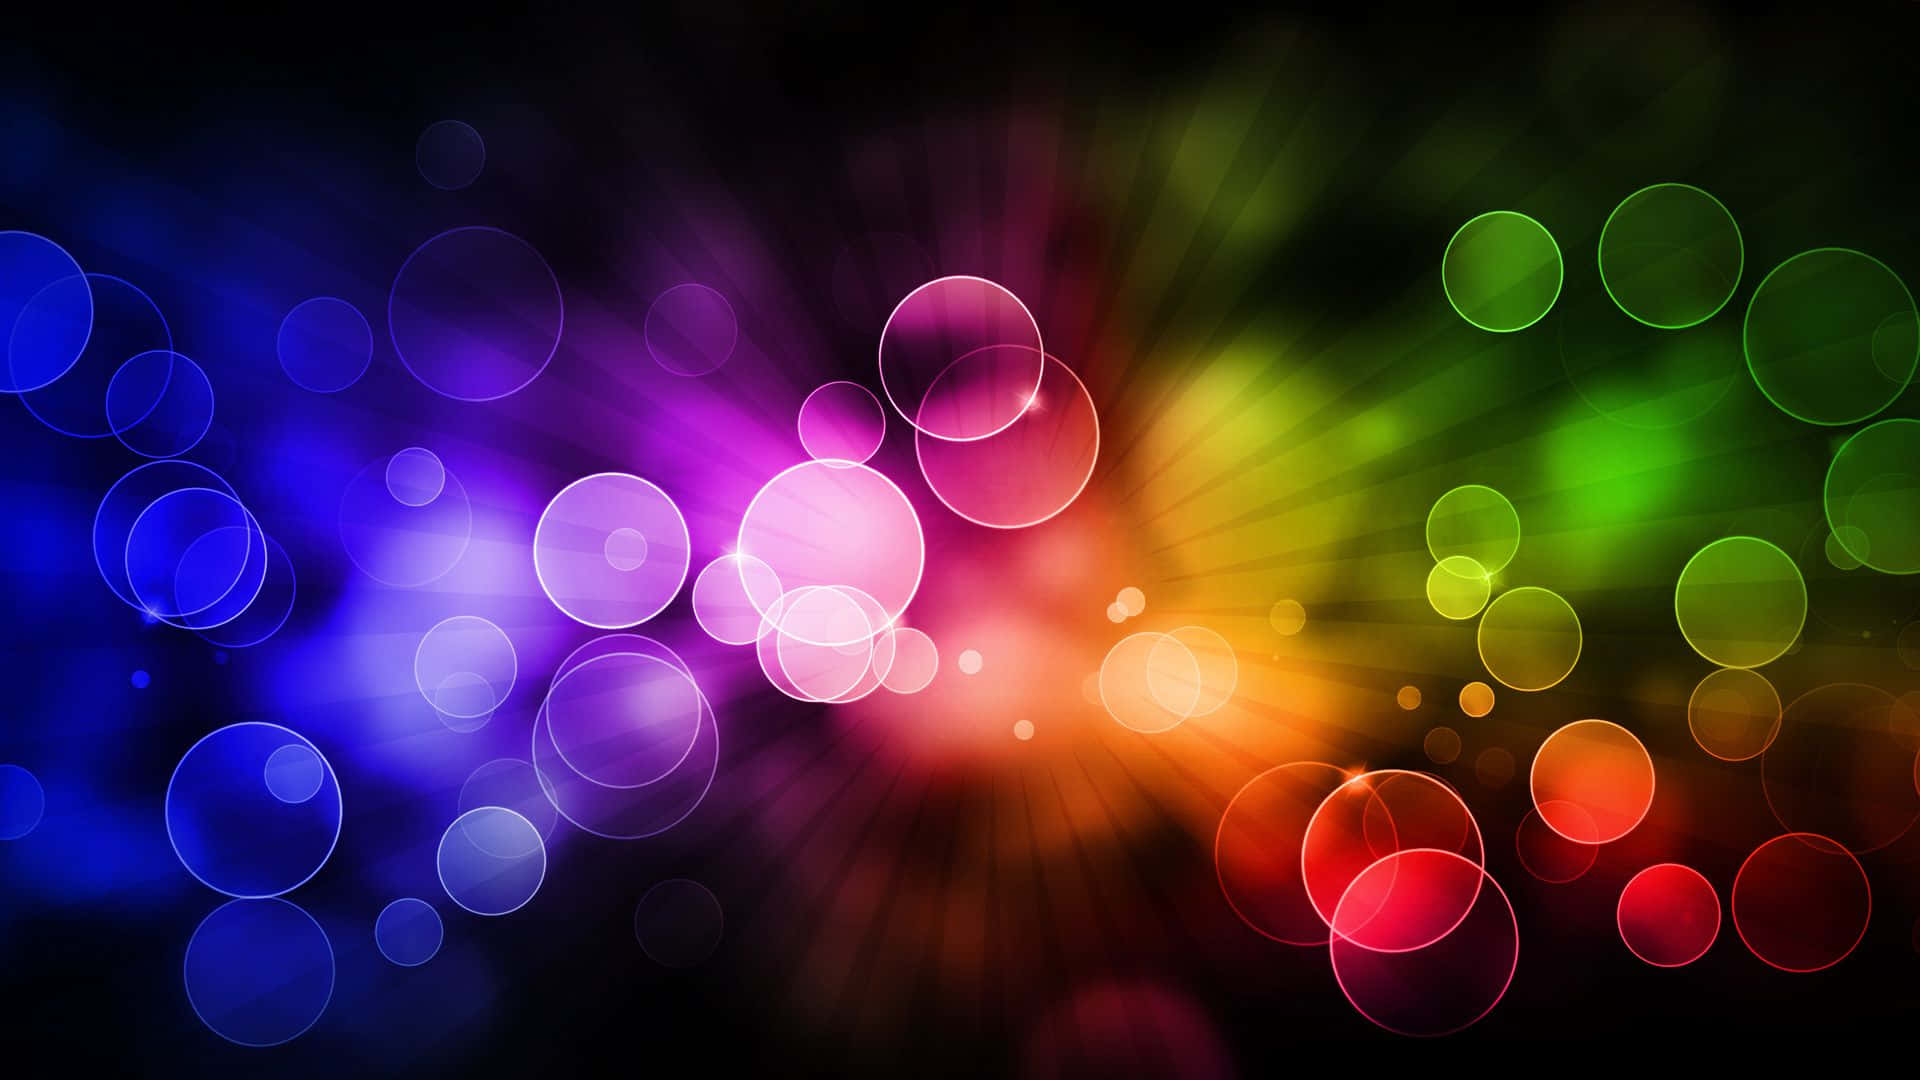 Colorful Lights On A Black Background